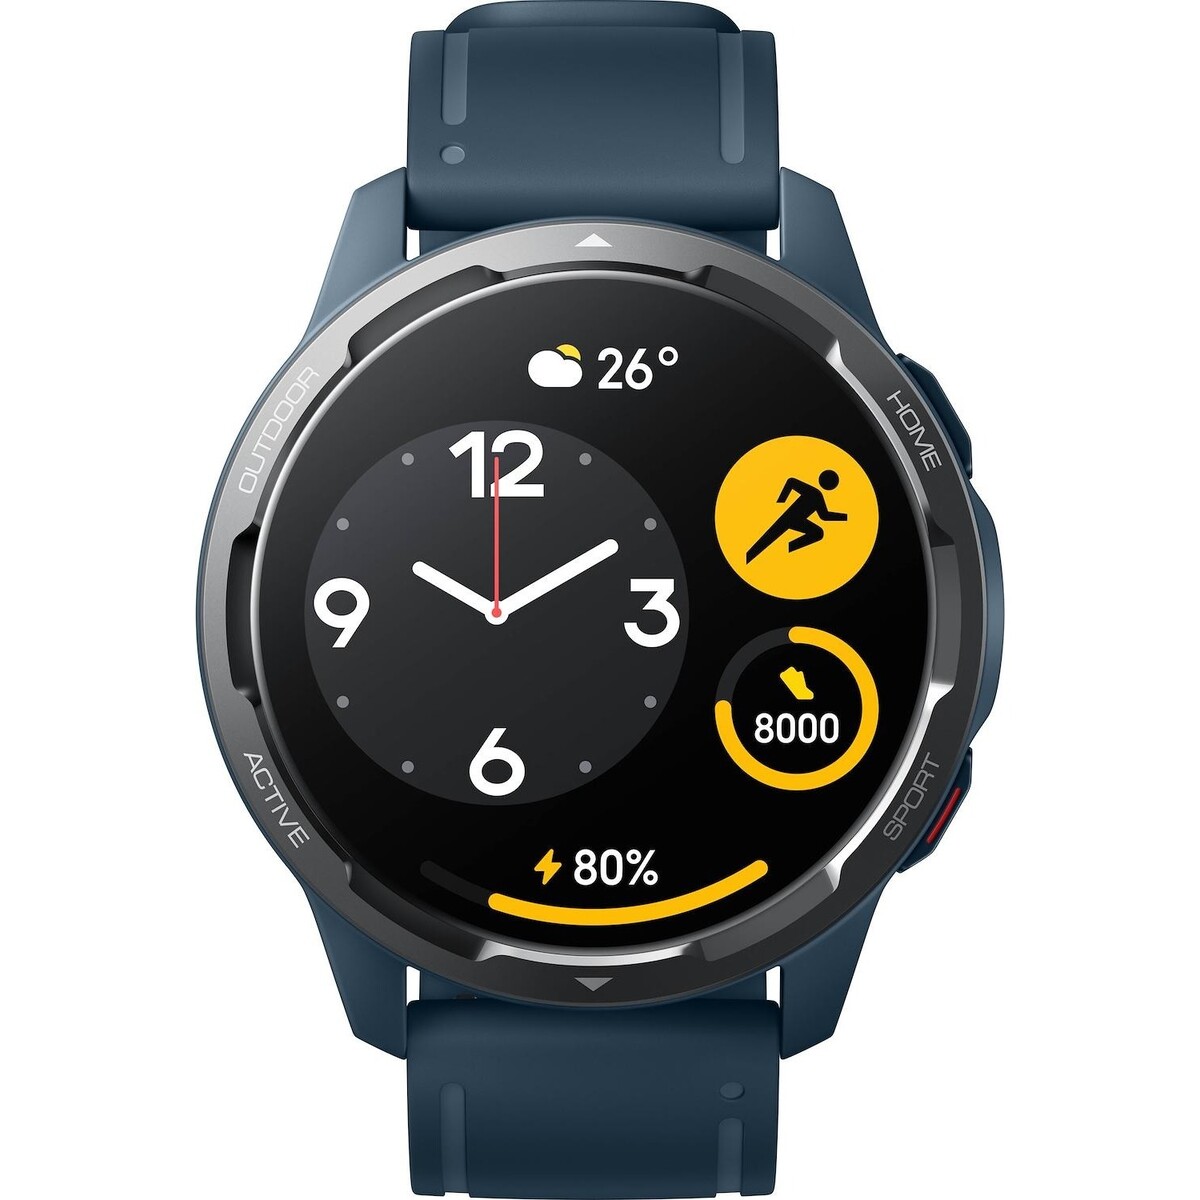 Confirmed Xiaomi Watch S1 Active price leaked along with more